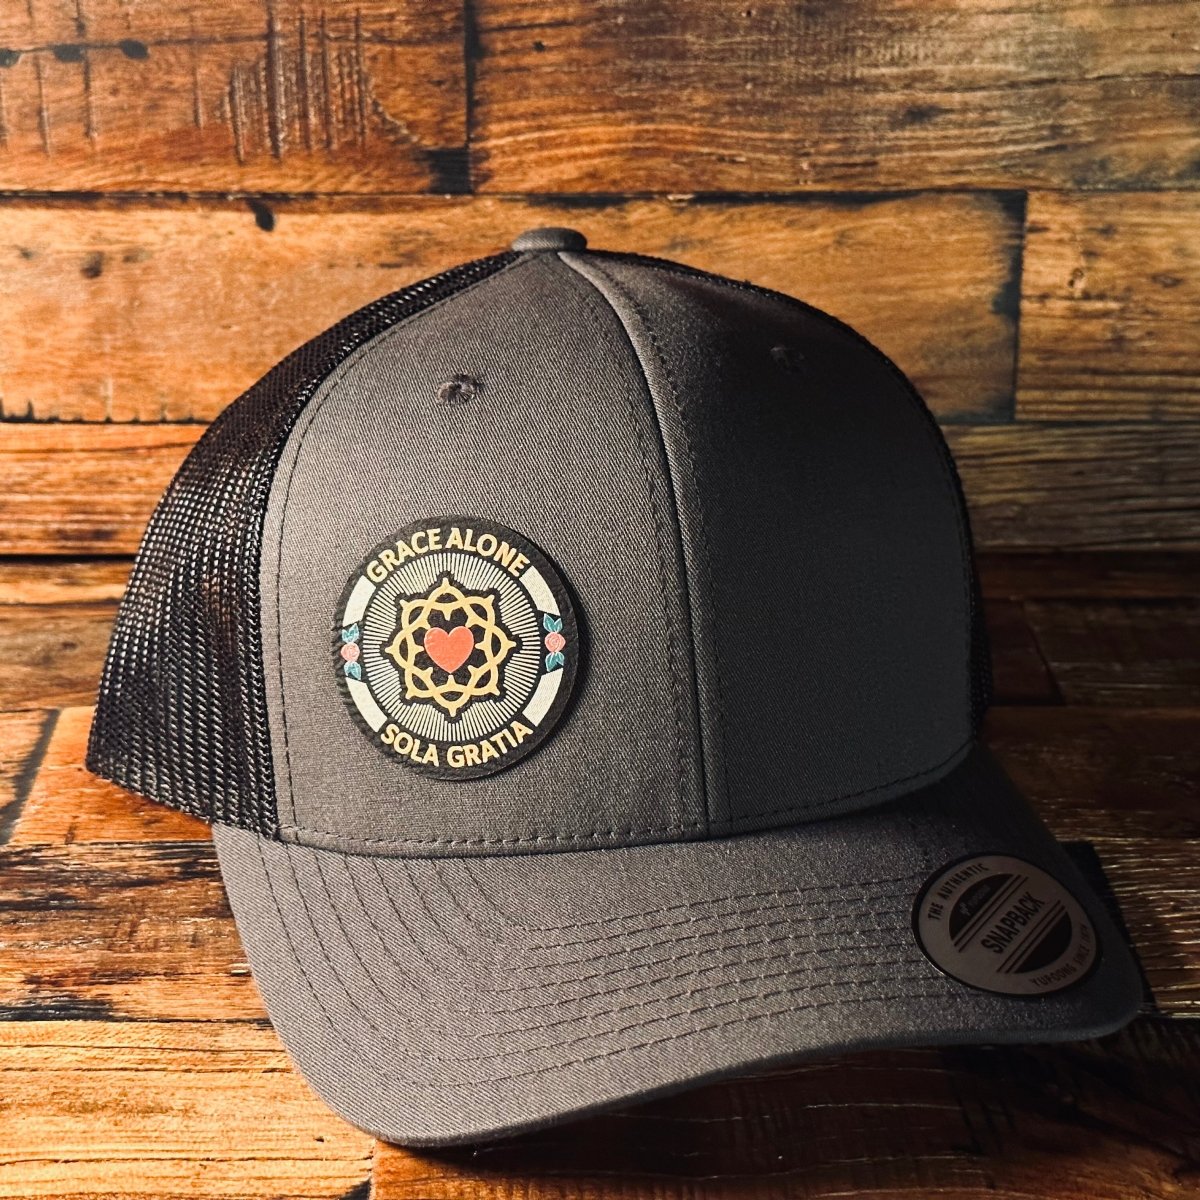 Hat - Sola Gratia Seal - UV Patch Hat - The Reformed Sage - #reformed# - #reformed_gifts# - #christian_gifts#